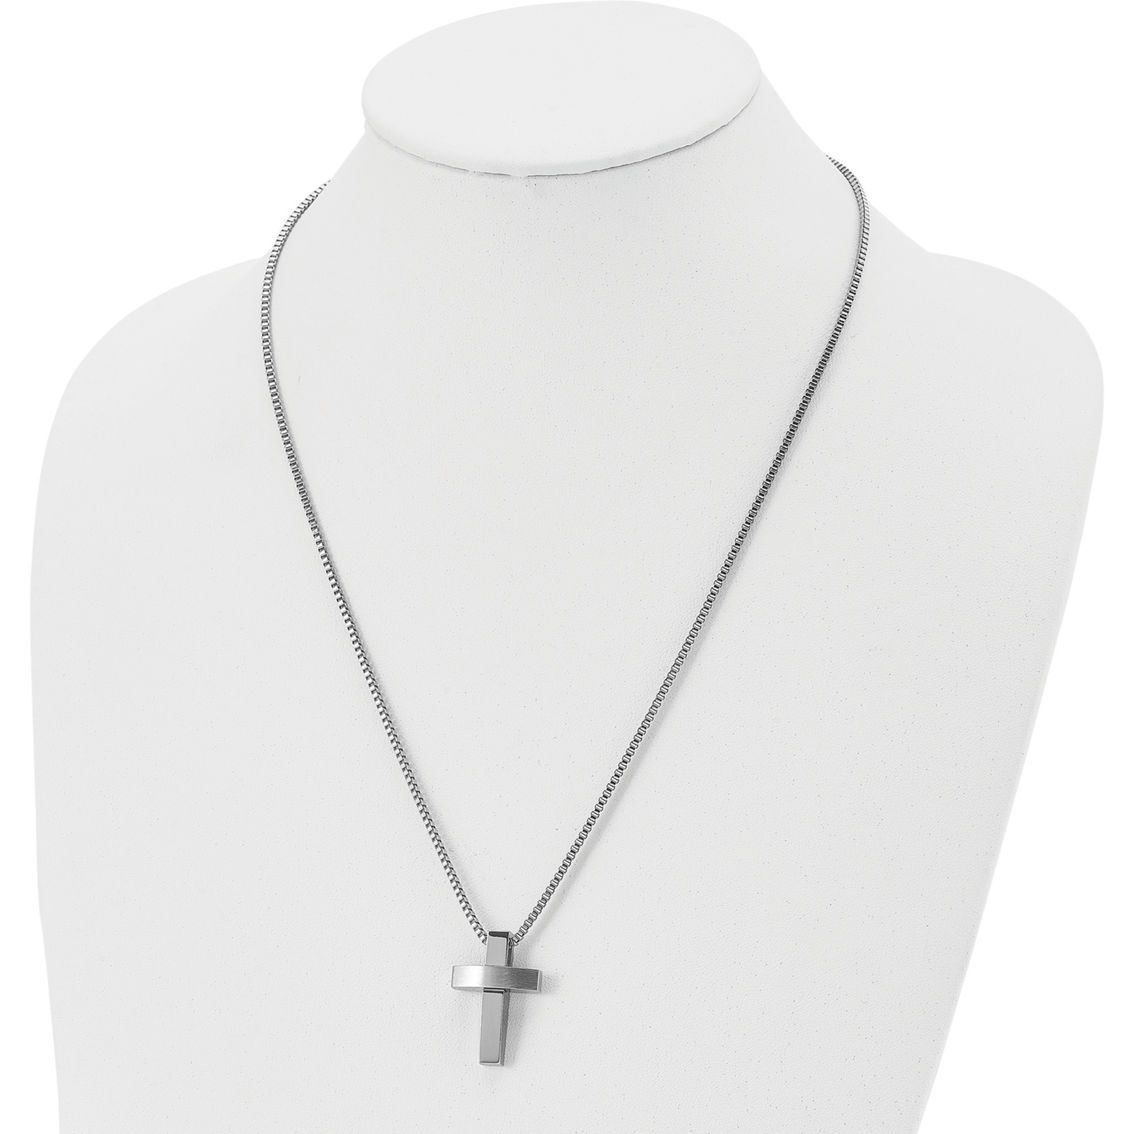 Chisel Stainless Steel Brushed and Polished Cross Pendant - Image 3 of 4